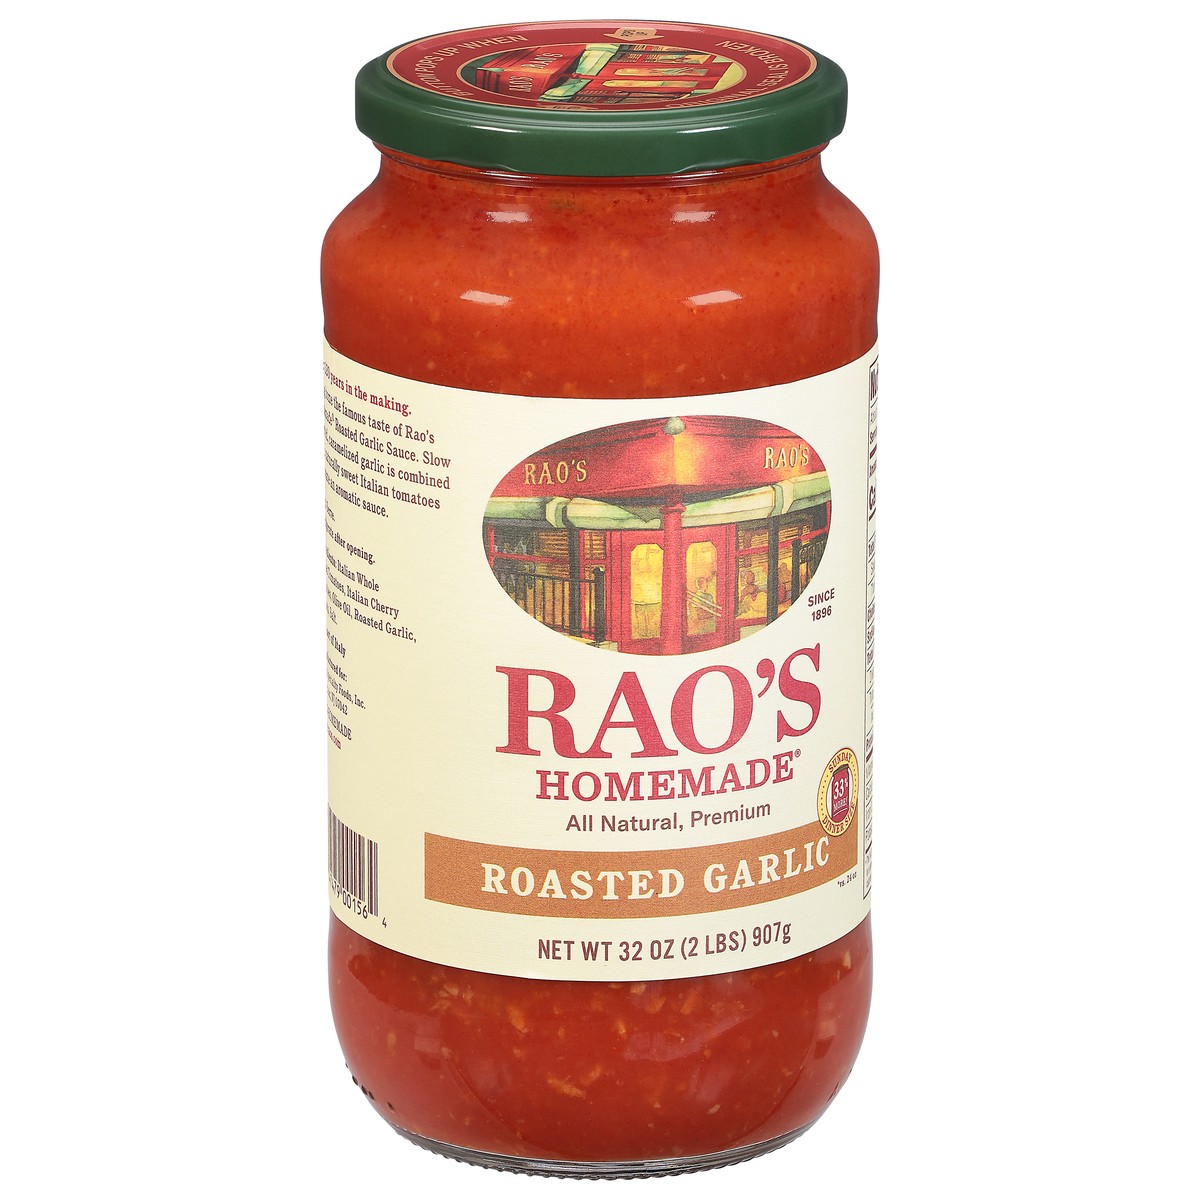 slide 9 of 9, Rao's Homemade Tomato Sauce | Roasted Garlic | 32 oz | Versatile Pasta Sauce | Carb Conscious, Keto Friendly | All Natural,  Premium Quality | Made with Sweet Italian Tomatoes and Caramelized Garlic, 12 oz